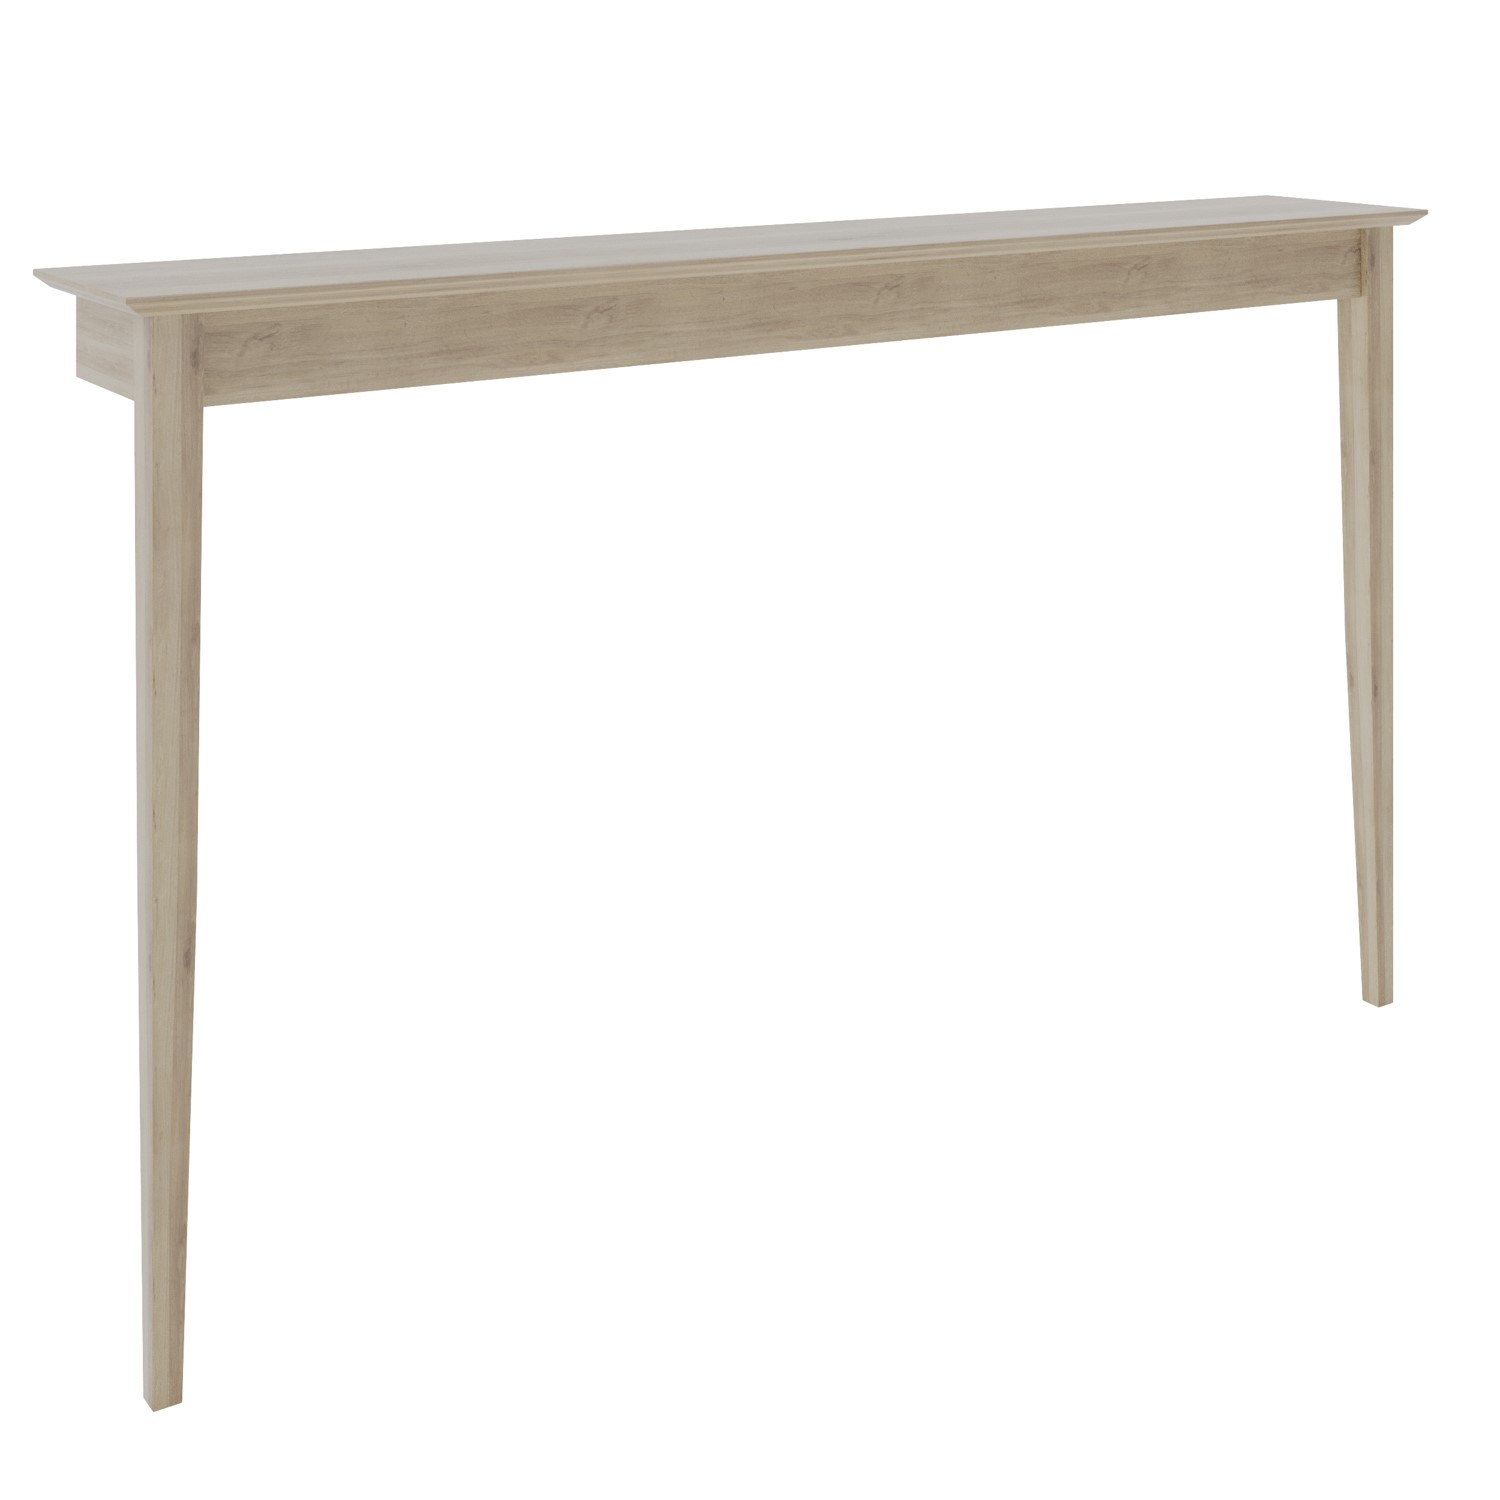 Photo of Large & narrow unfinished wall mounted console table - ava